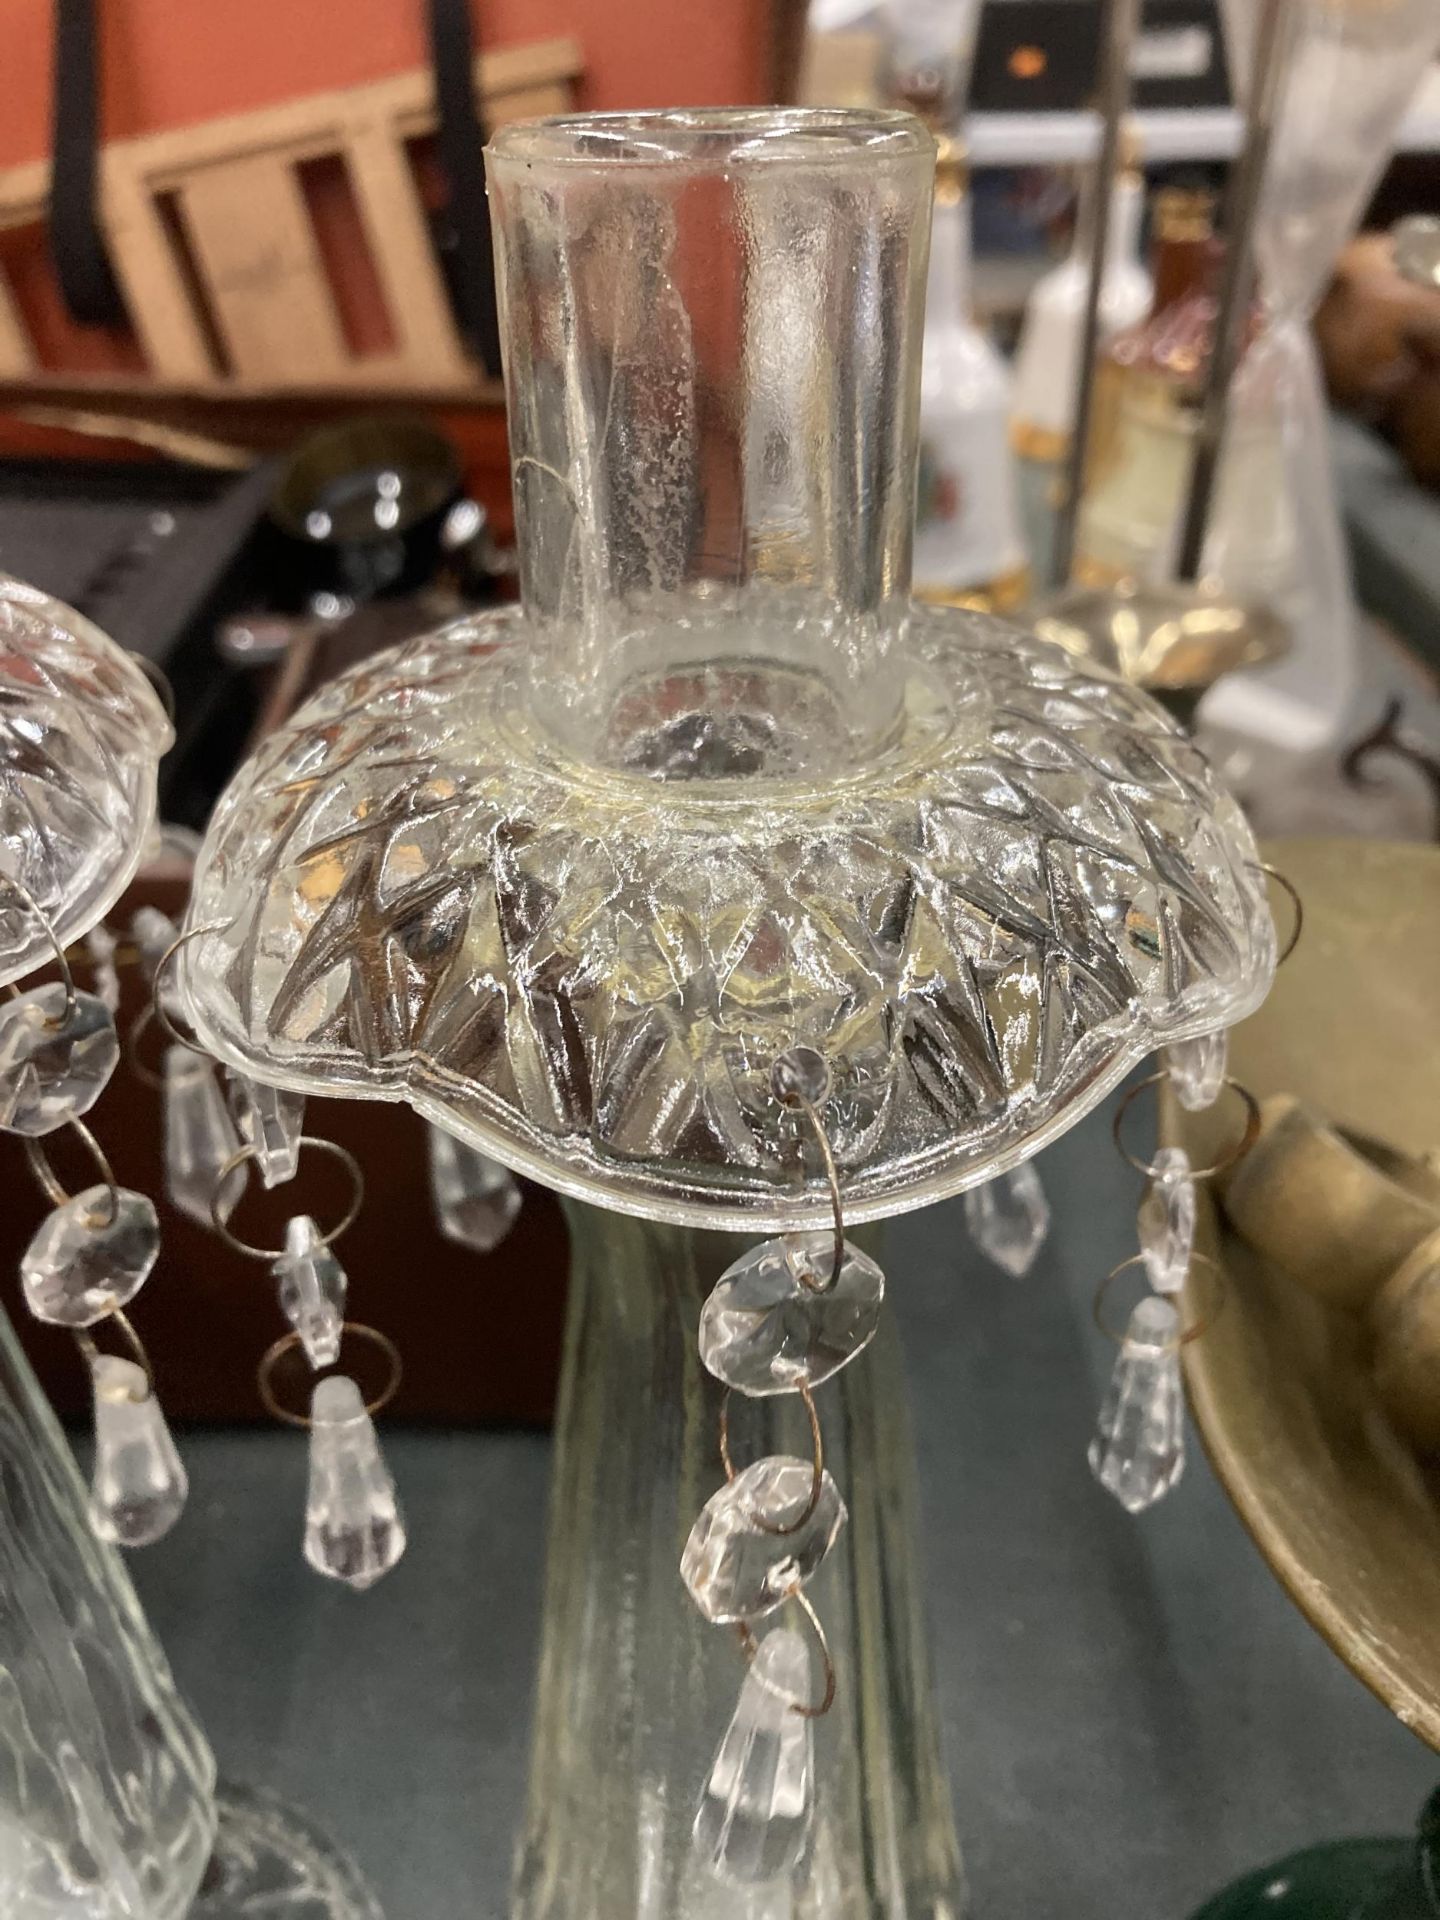 A PAIR OF VINTAGE GLASS TABLE LUSTRES WITH GLASS DROPLETS - Image 2 of 2